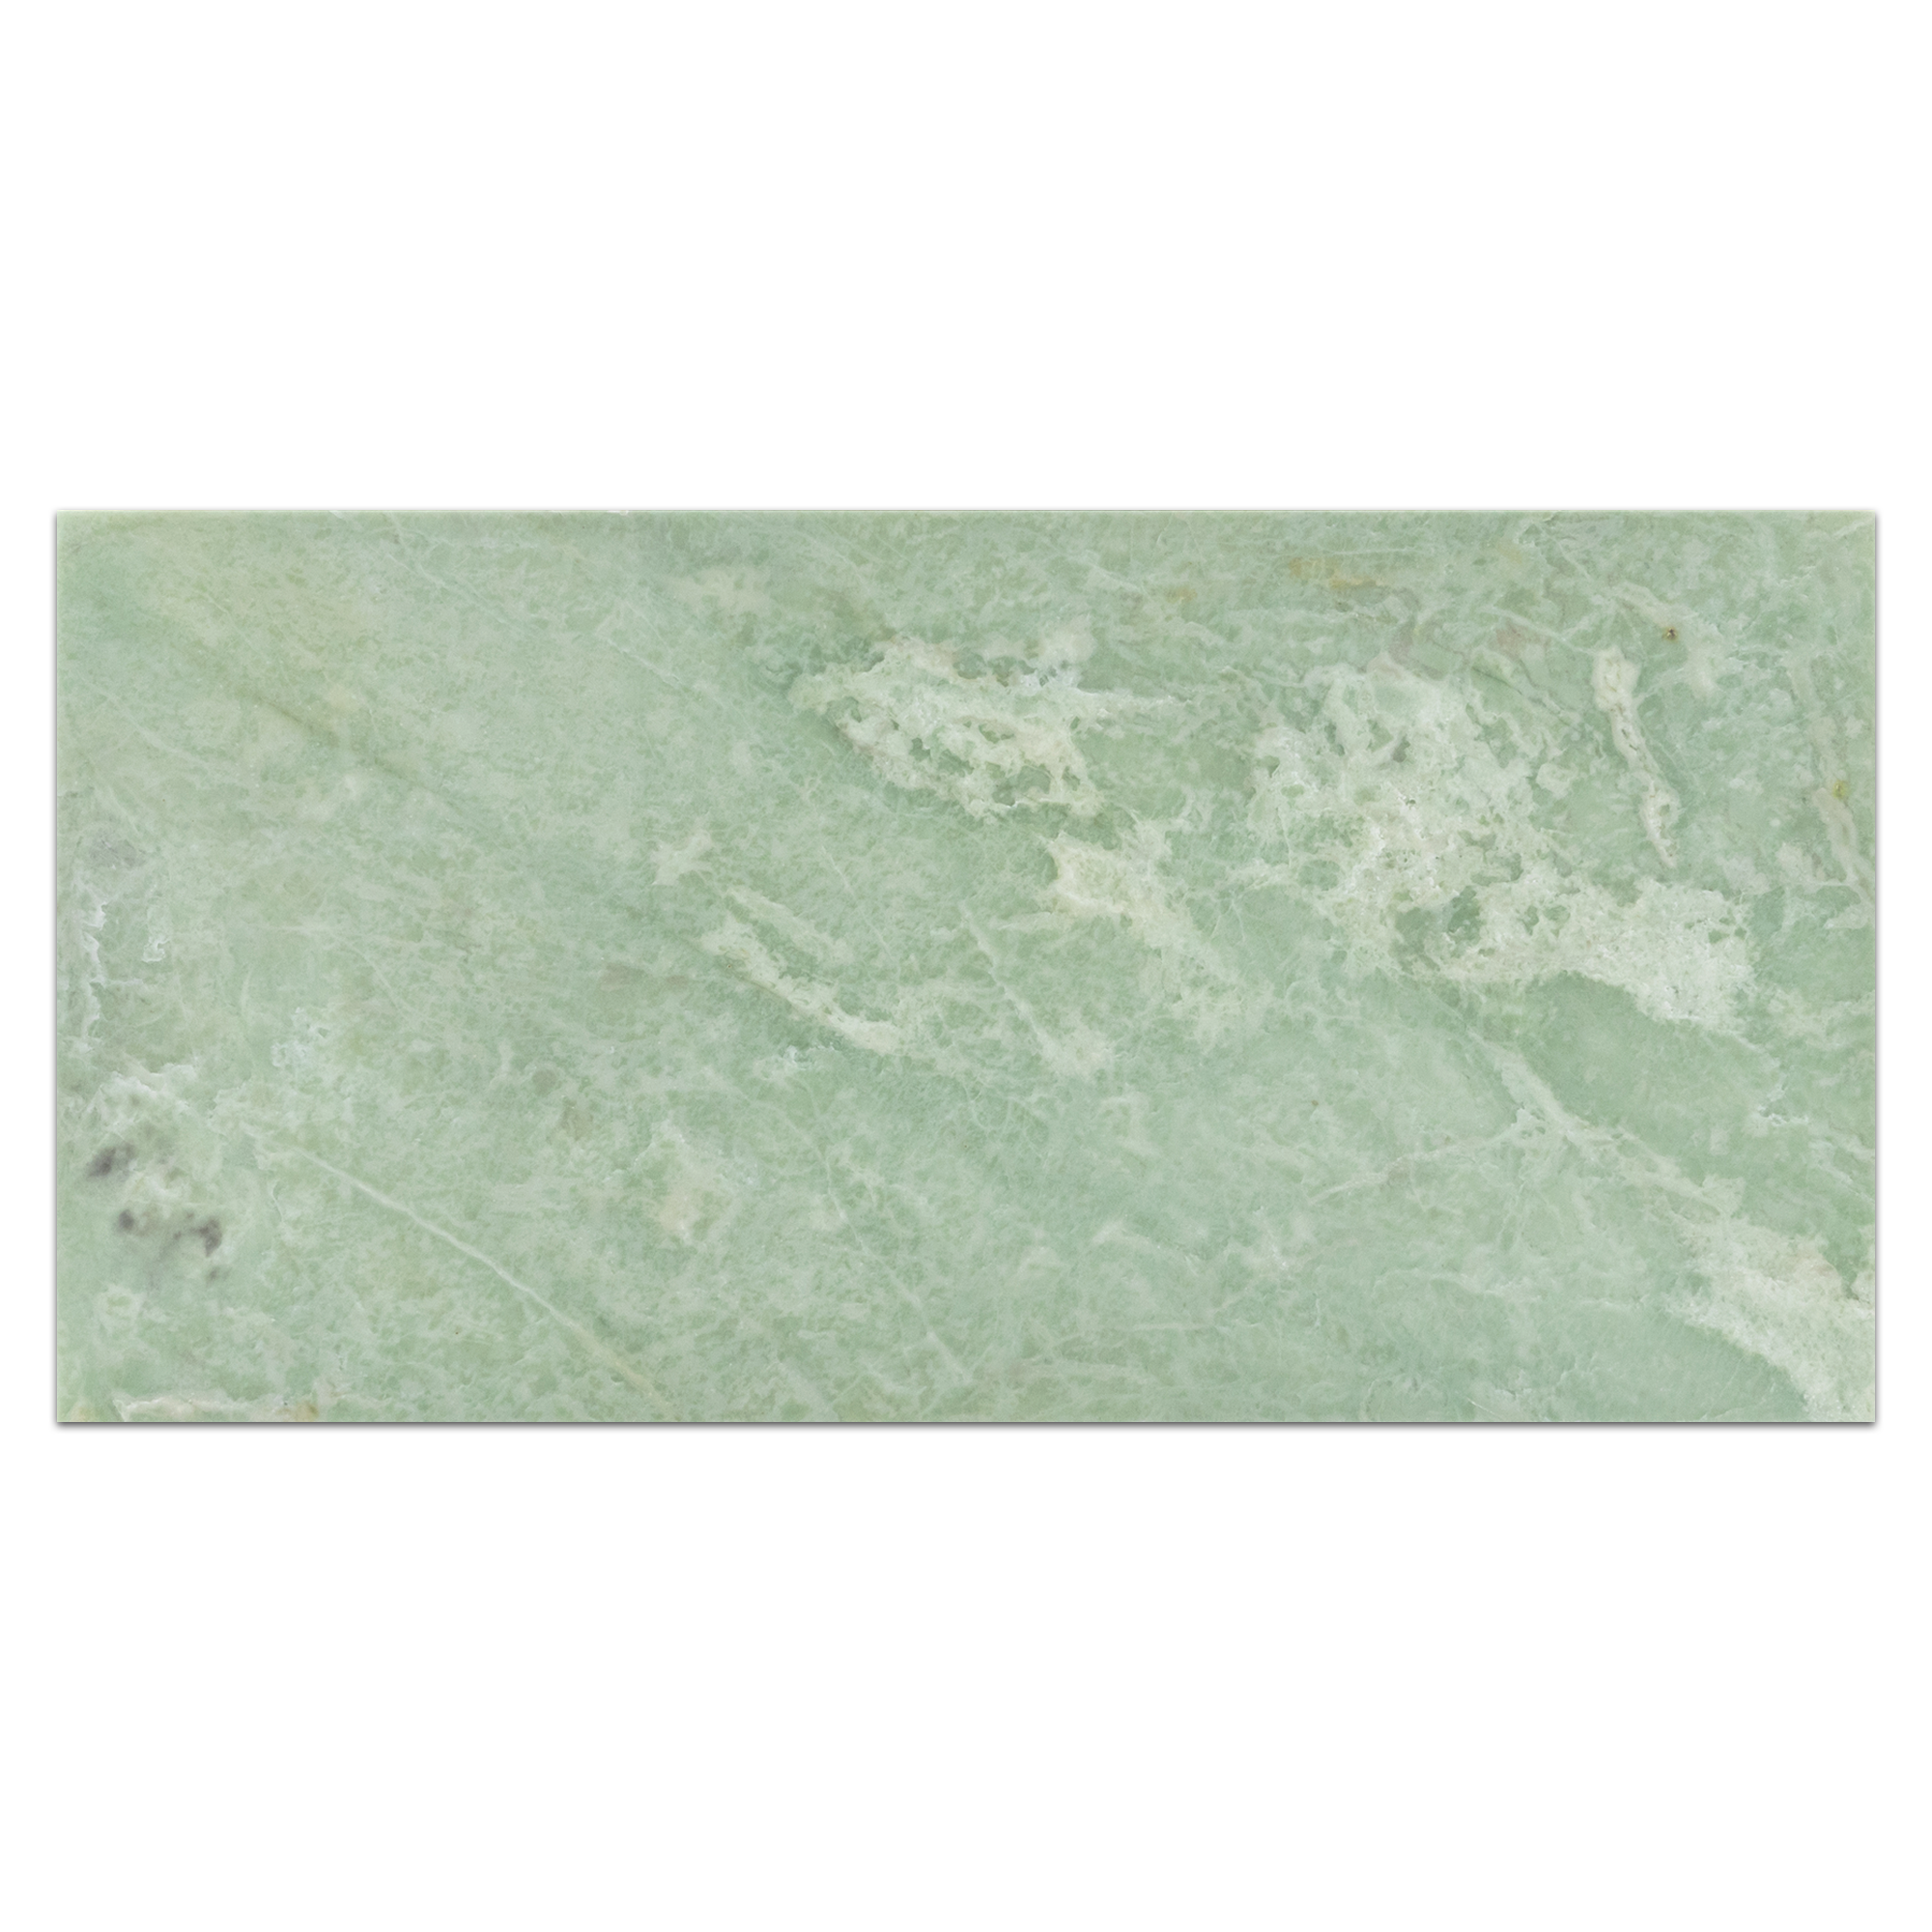 Elon emerald green marble rectangle field tile 12x24x0.375 honed AM6624H Surface Group International product